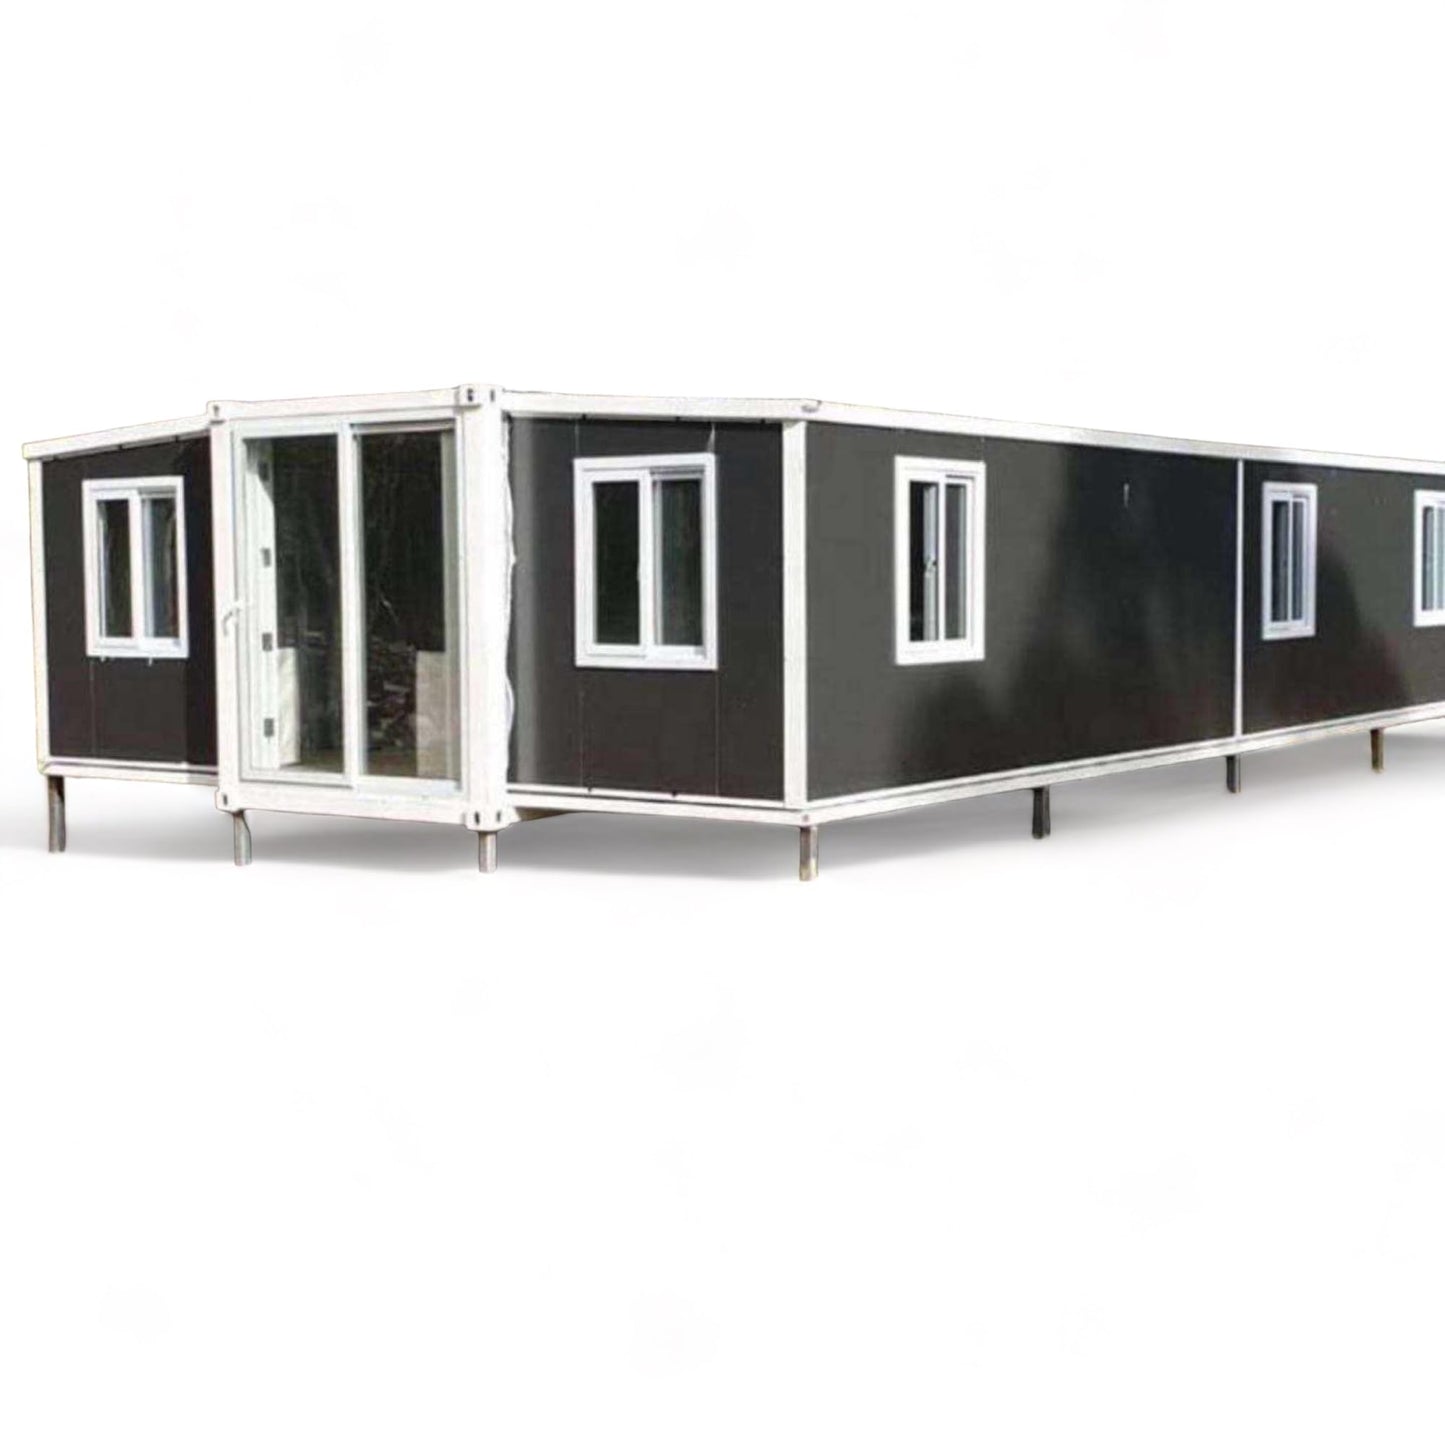 ALIWALI Foldable Tiny House (13x20ft) - Portable, Versatile Living Solution for Anywhere Living,Fully Furnished,for Office Work.